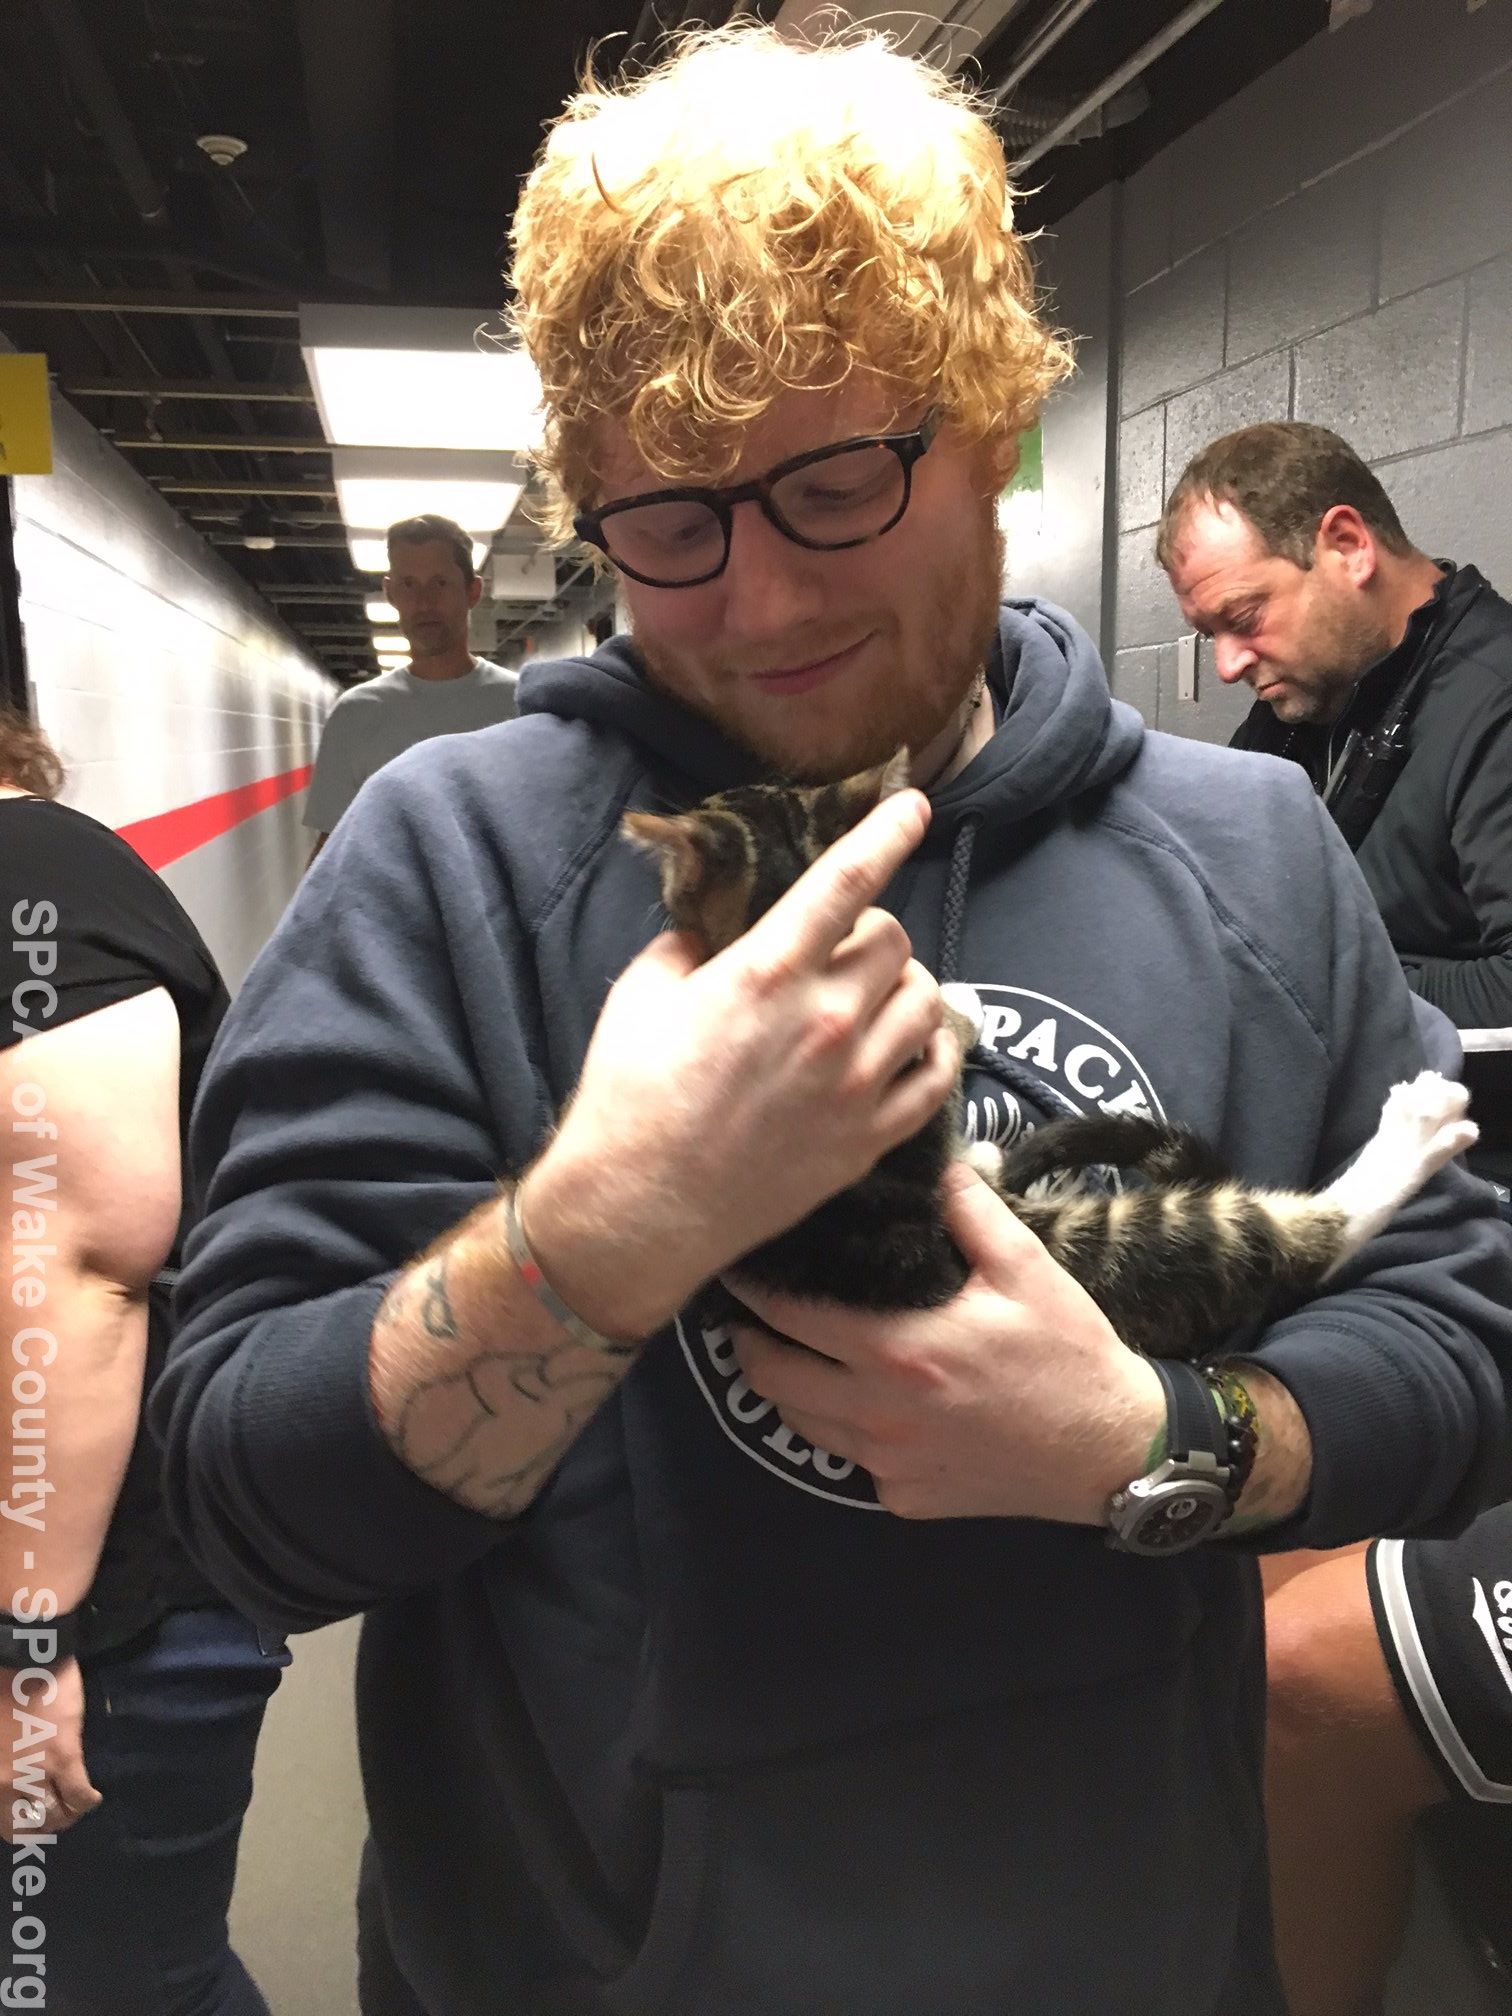 Ed Sheeran surprised with kittens during Raleigh concert